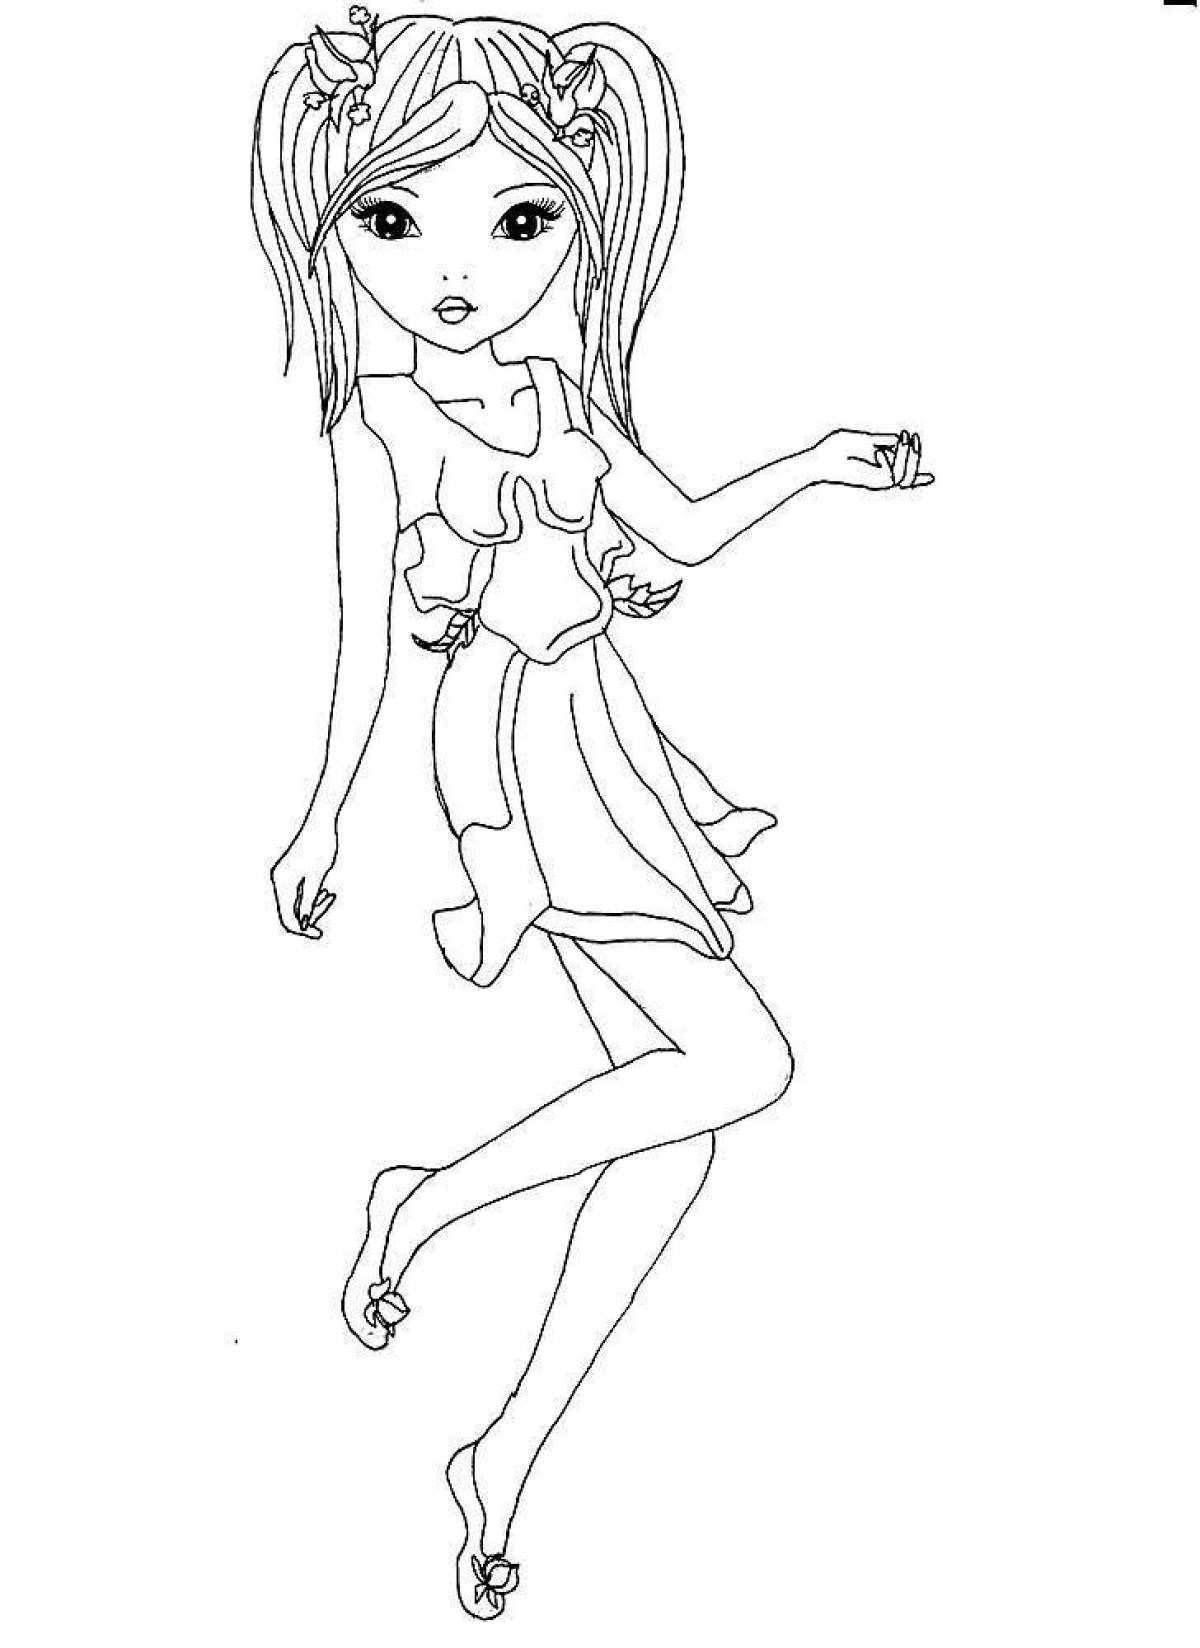 Exquisite model coloring page